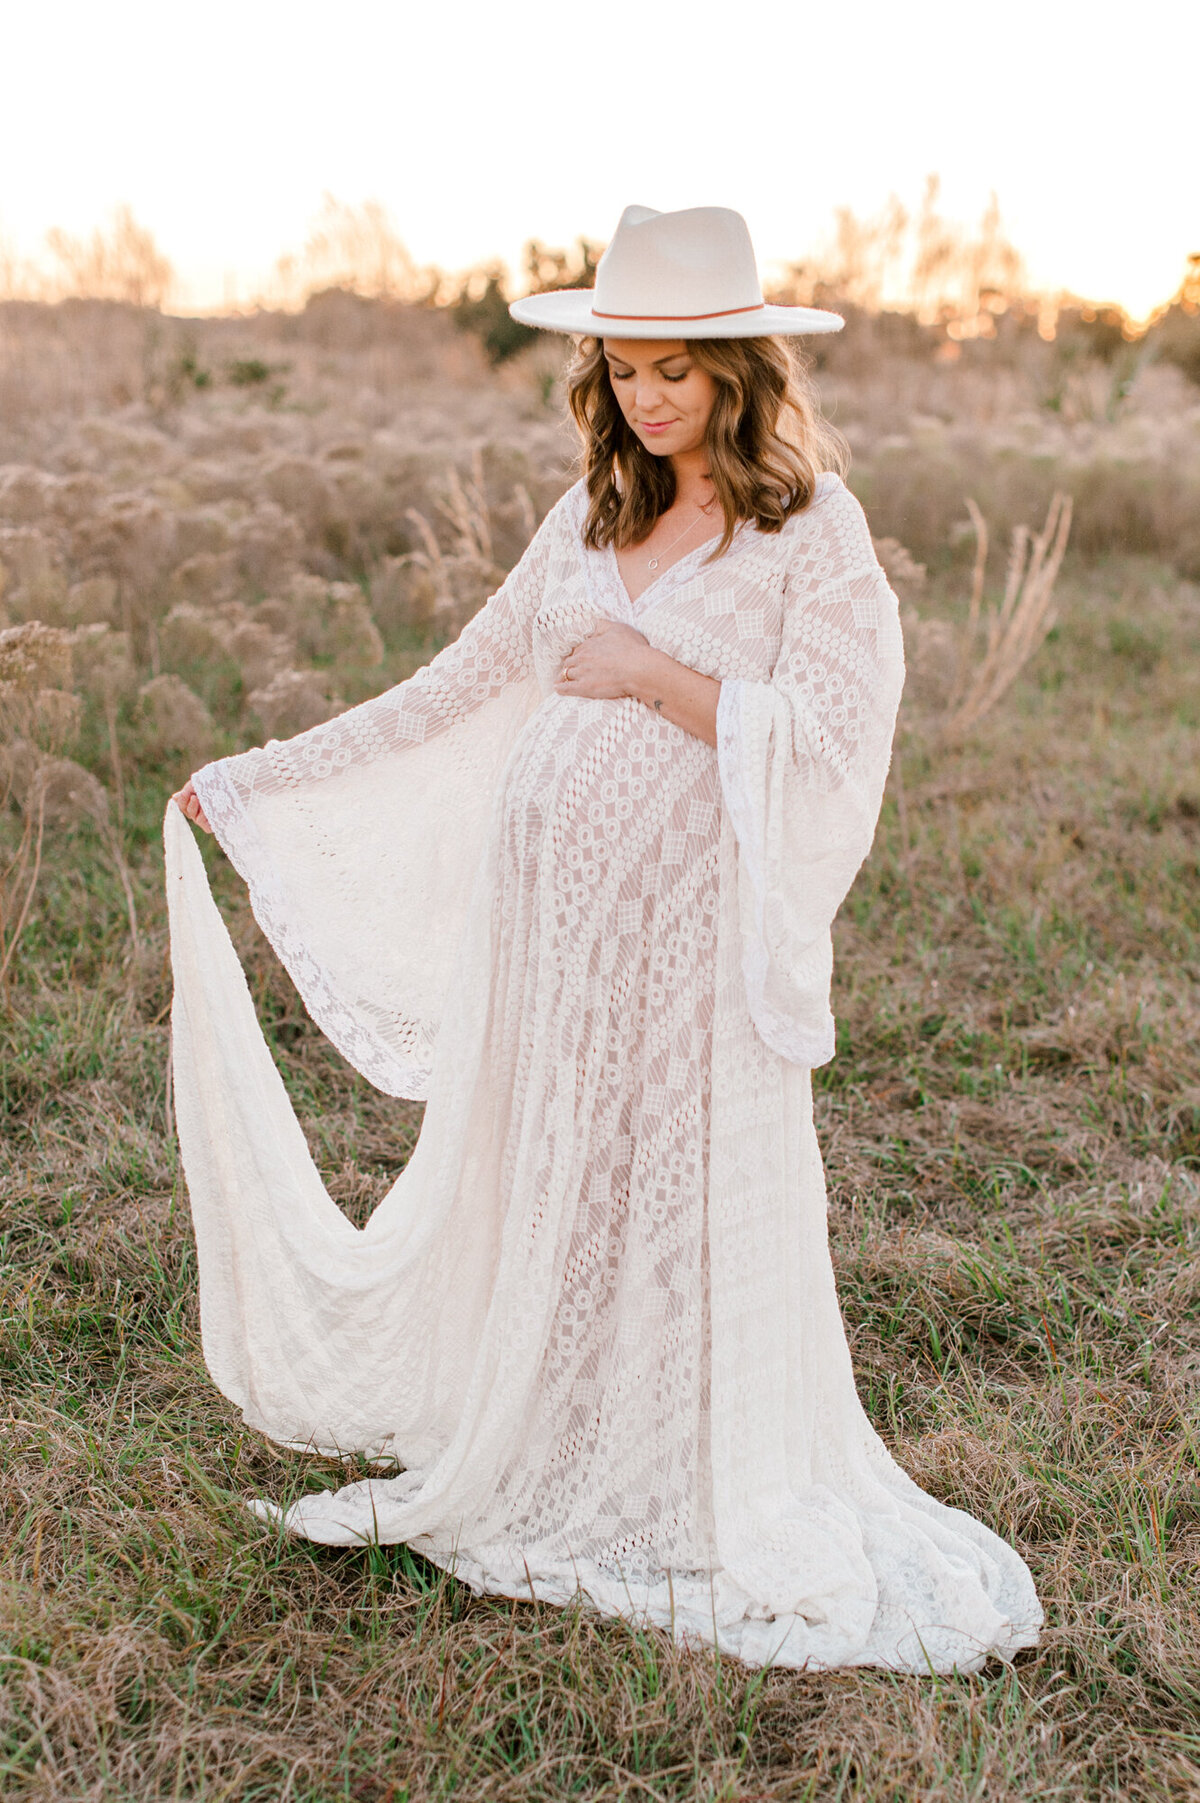 Pregnant mom stands holding her dress and belly at sunset in a field.